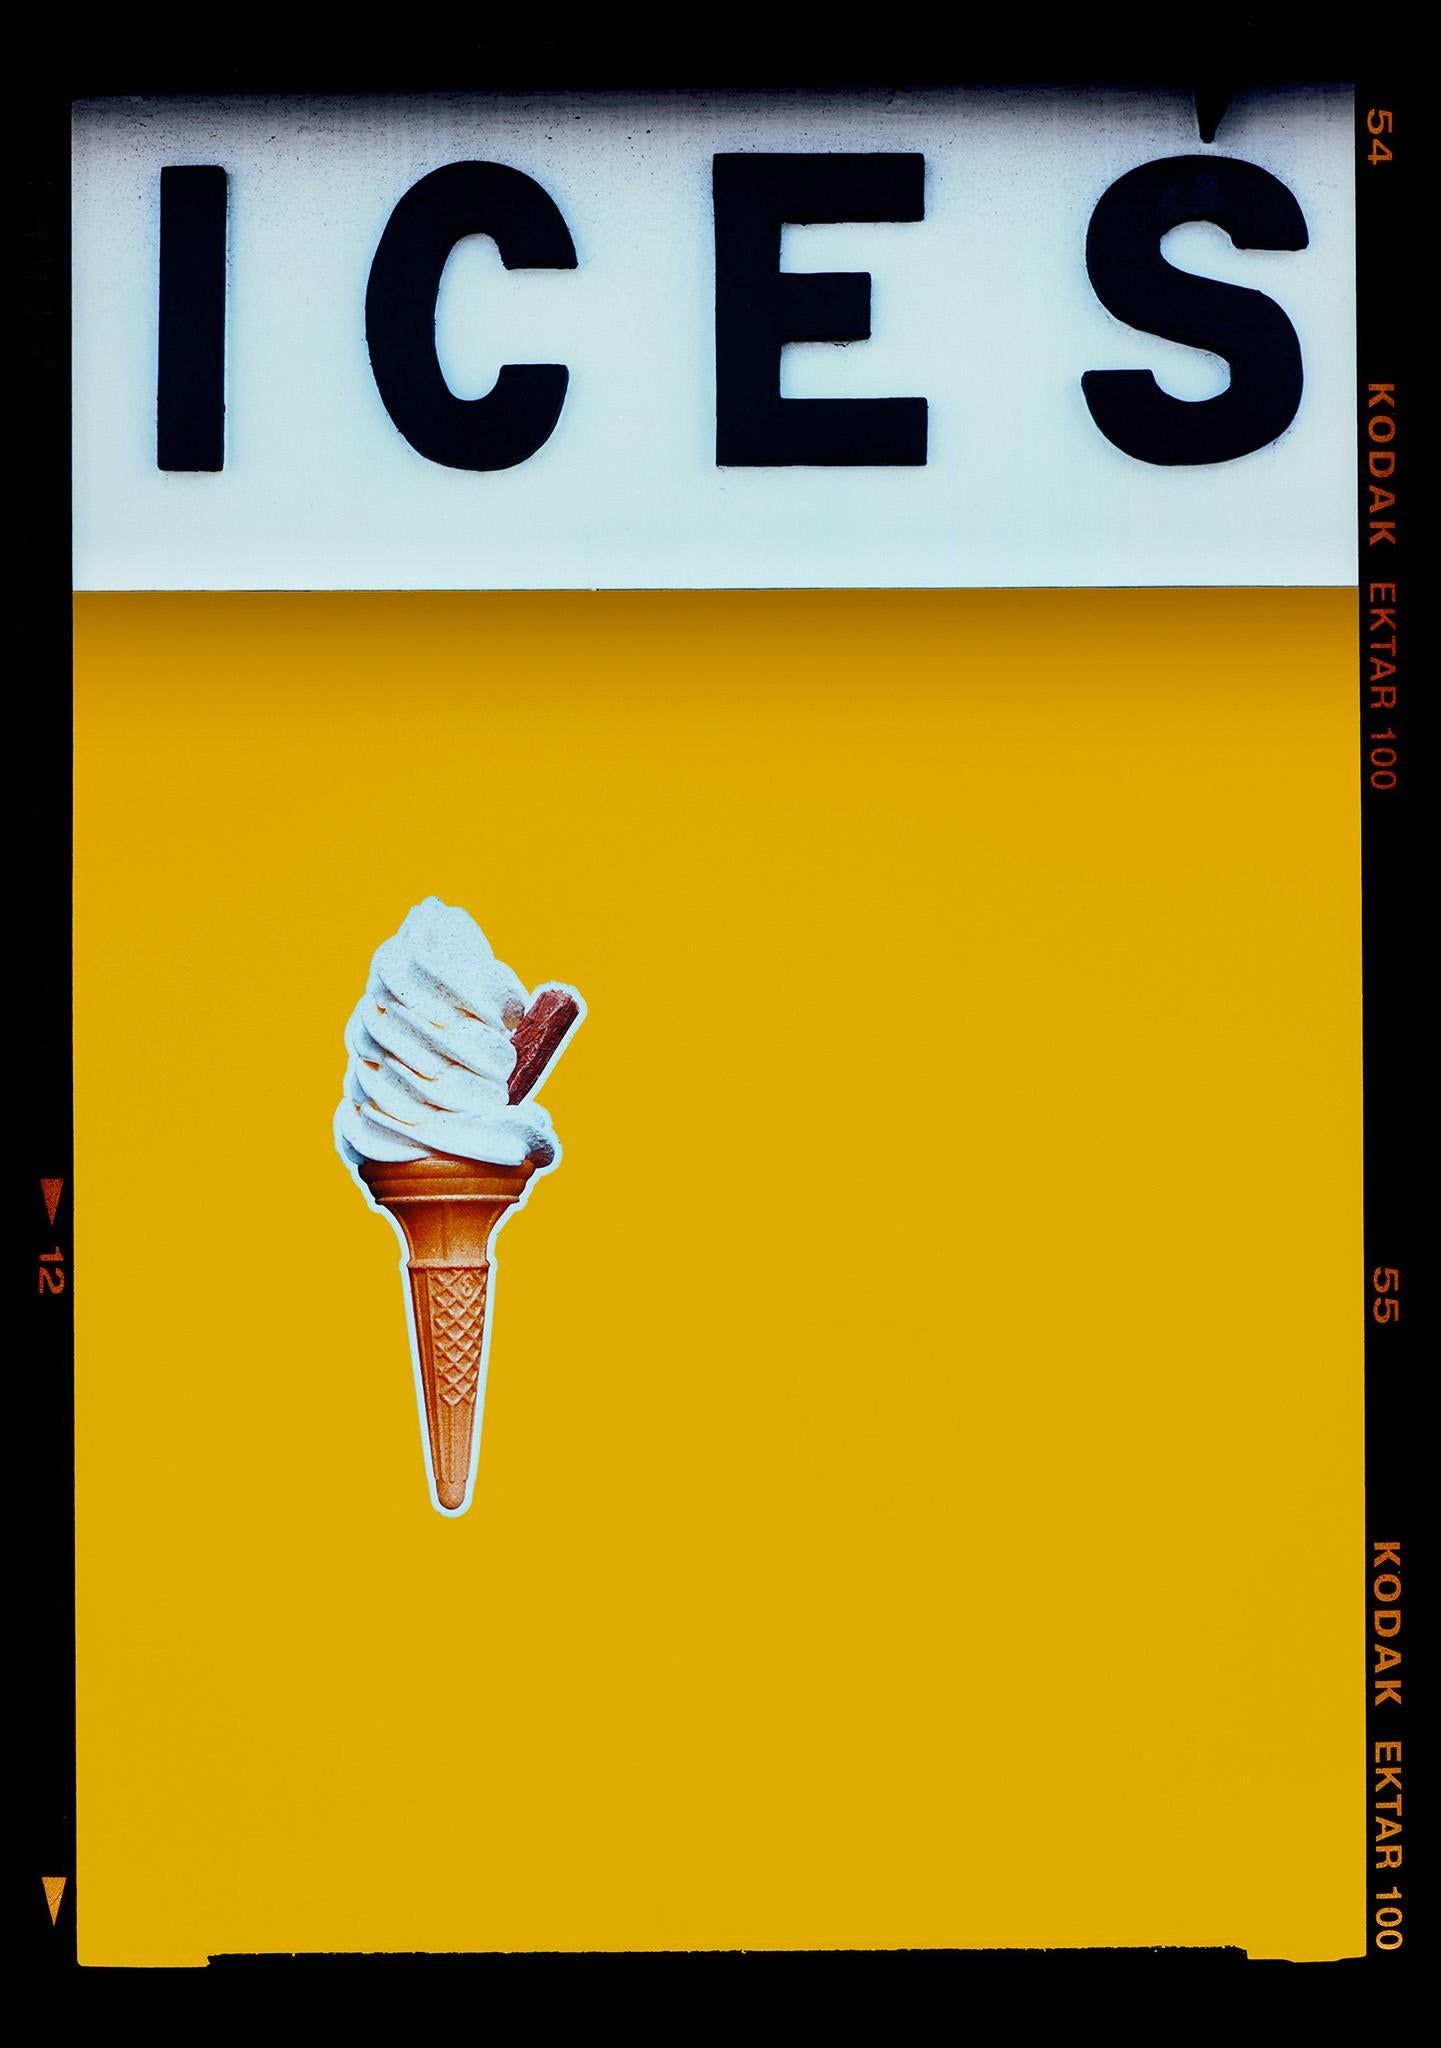 ICES, by Richard Heeps, photographed at the British Seaside at the end of summer 2020. This artwork is about evoking memories of the simple joy of days by the beach. The mustard yellow color blocking, typography and the surreal twist of the